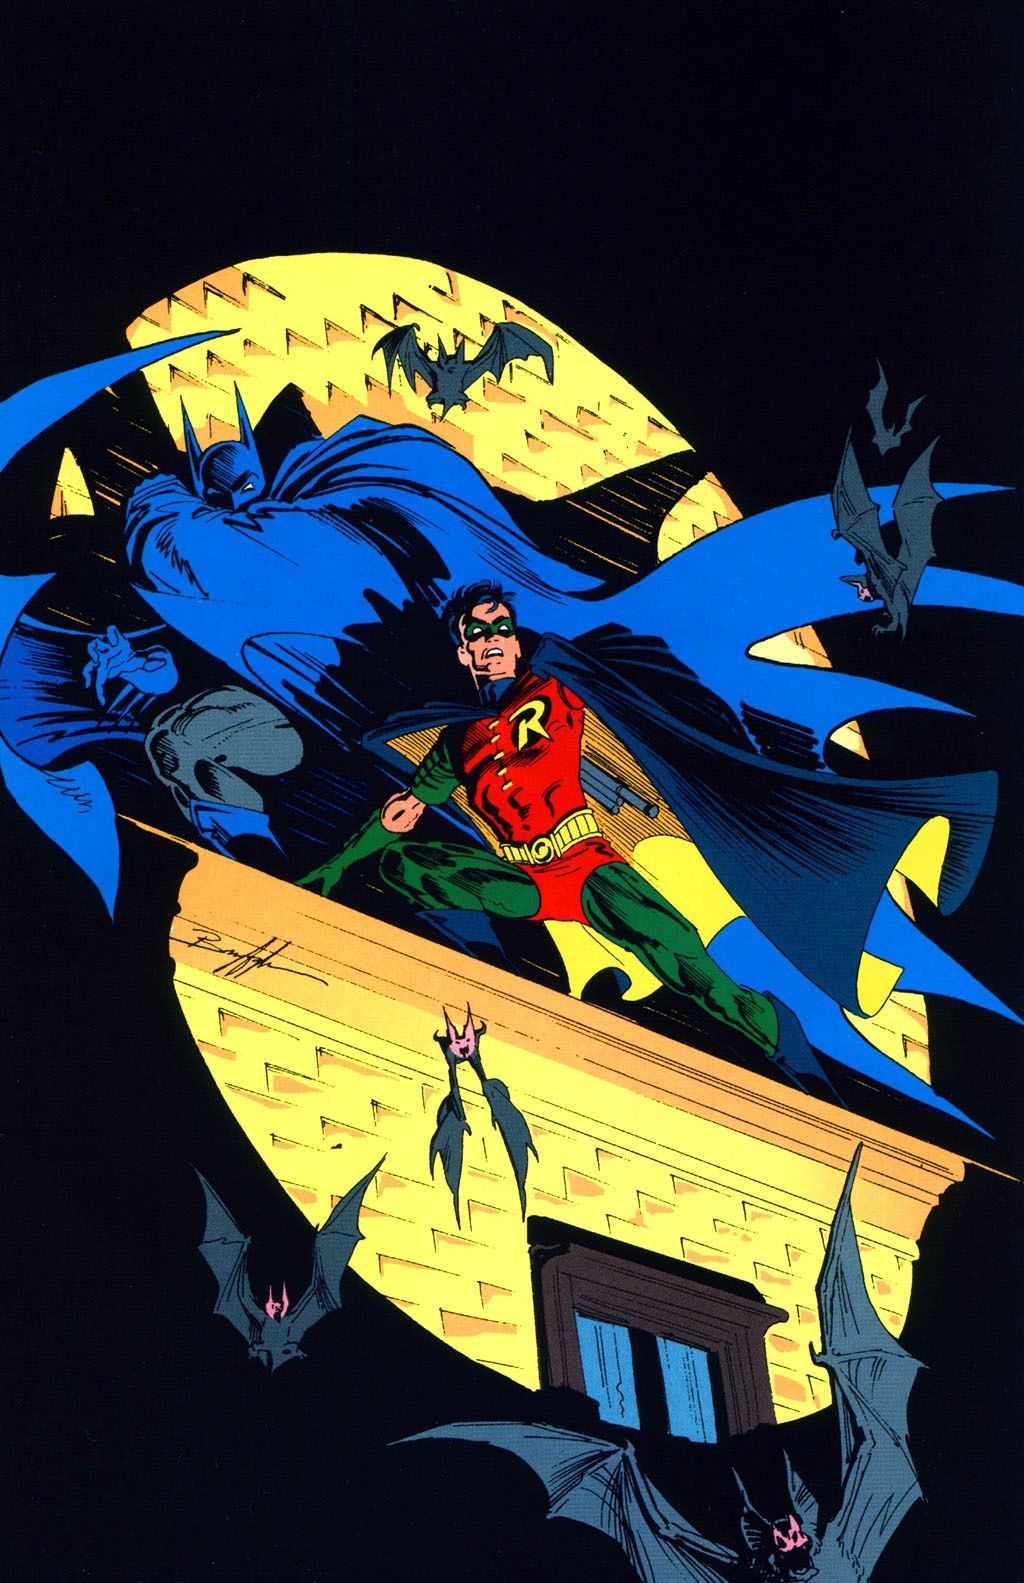 Cover art for Batman #465 by Norm Breyfogle